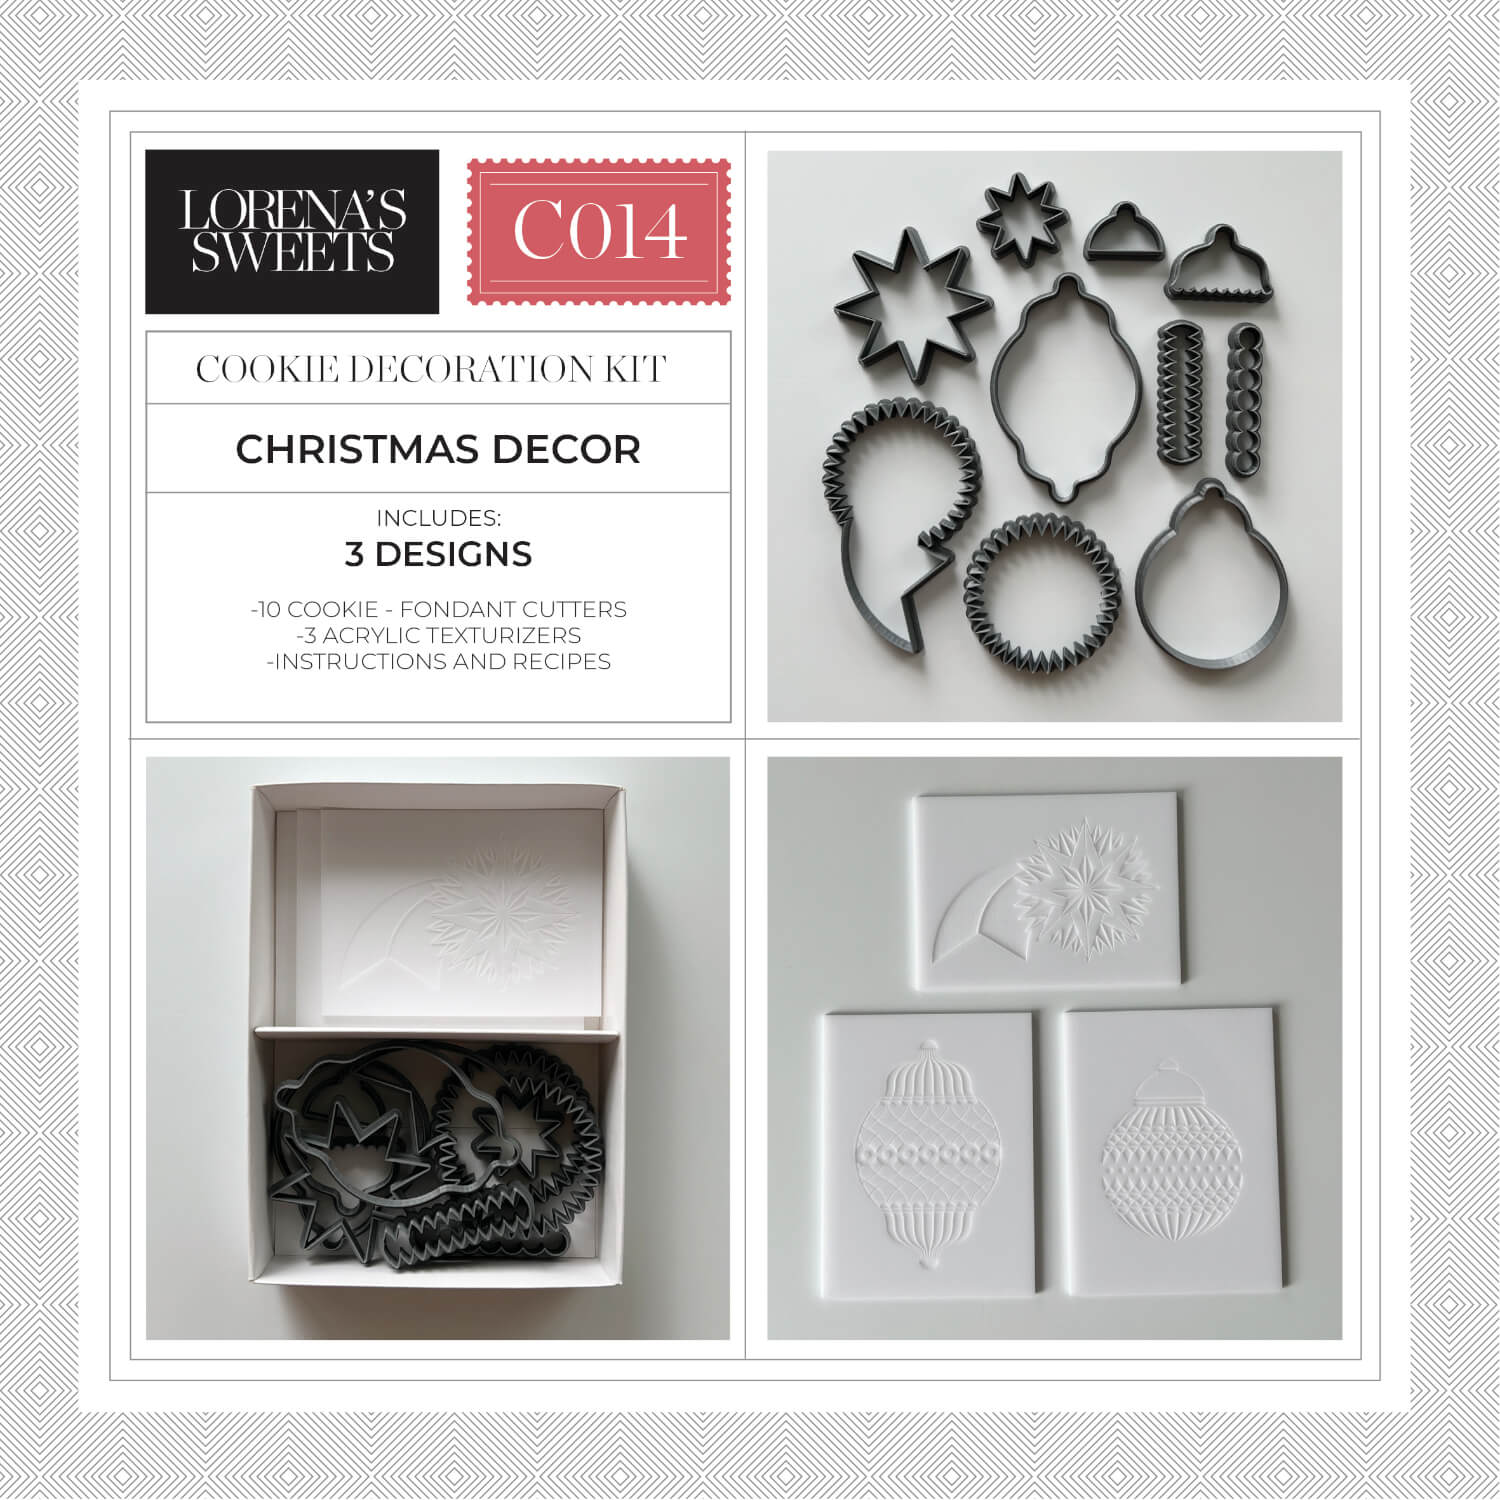 Cookie_Decoration_Kit_Christmas_Decor_by_Lorena_s_Sweets